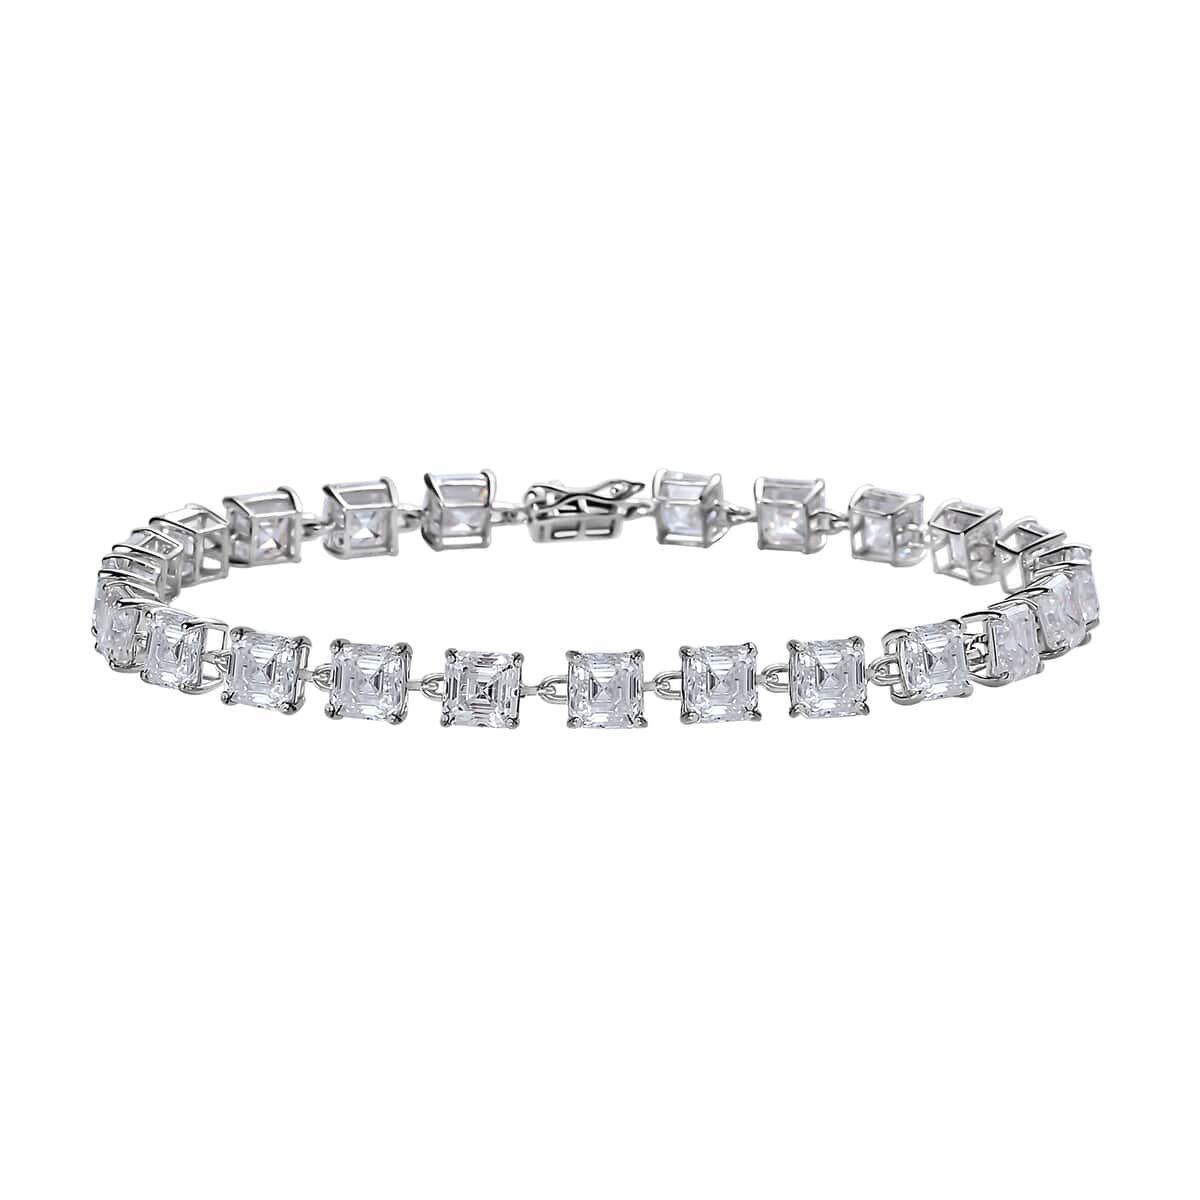 LUXORO 10K White Gold Asscher Cut Moissanite Link Bracelet (6.50 In) 4 Grams 13.85 ctw (Delivery in 7-10 Business Days) image number 0